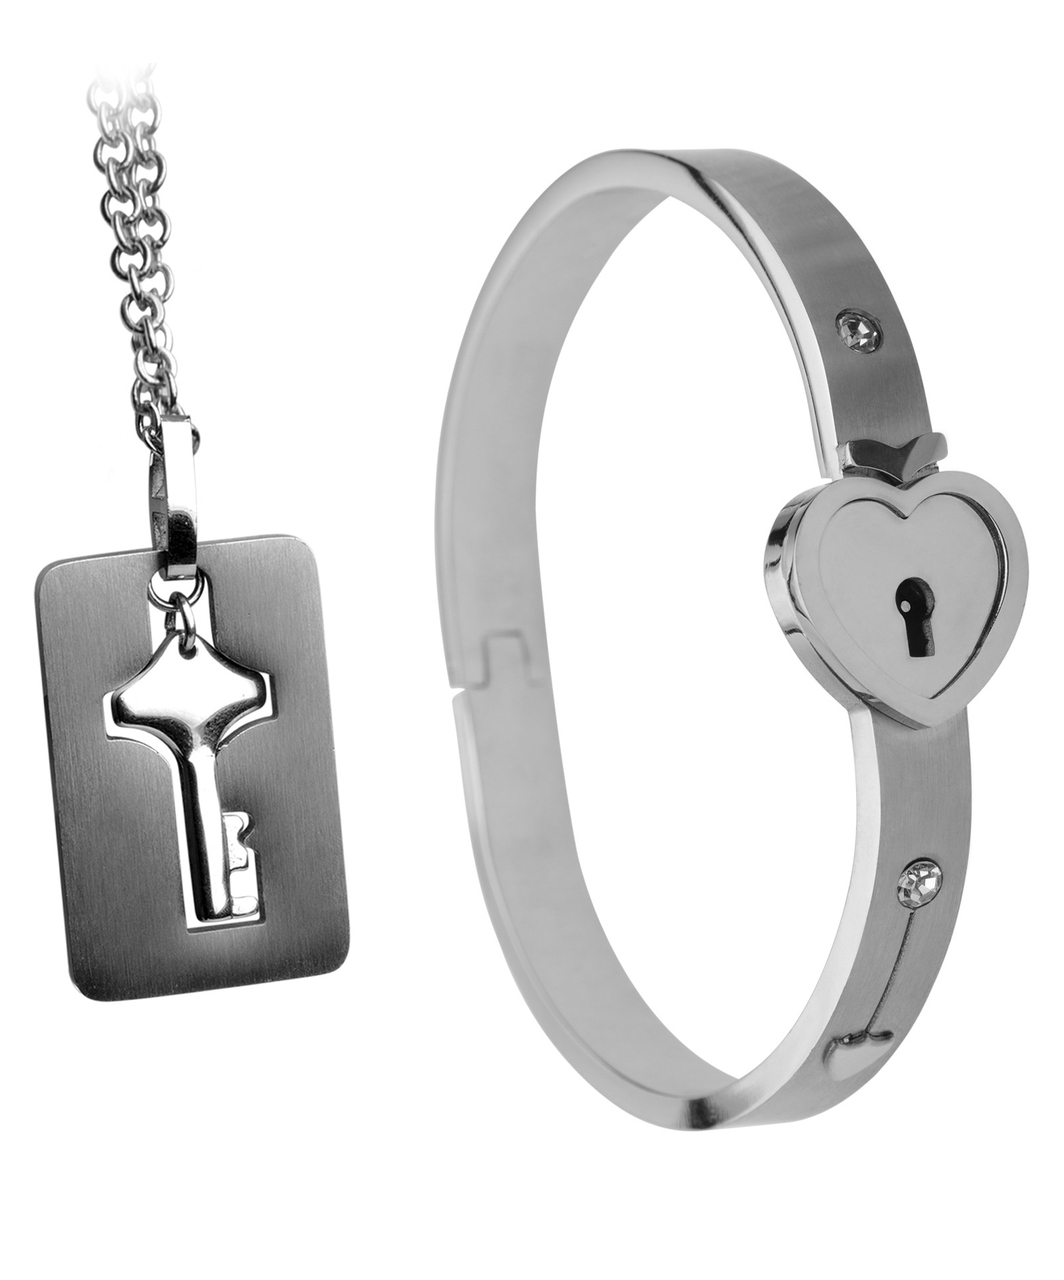 Master Series Cuffed Locking Bracelet and Key Necklace